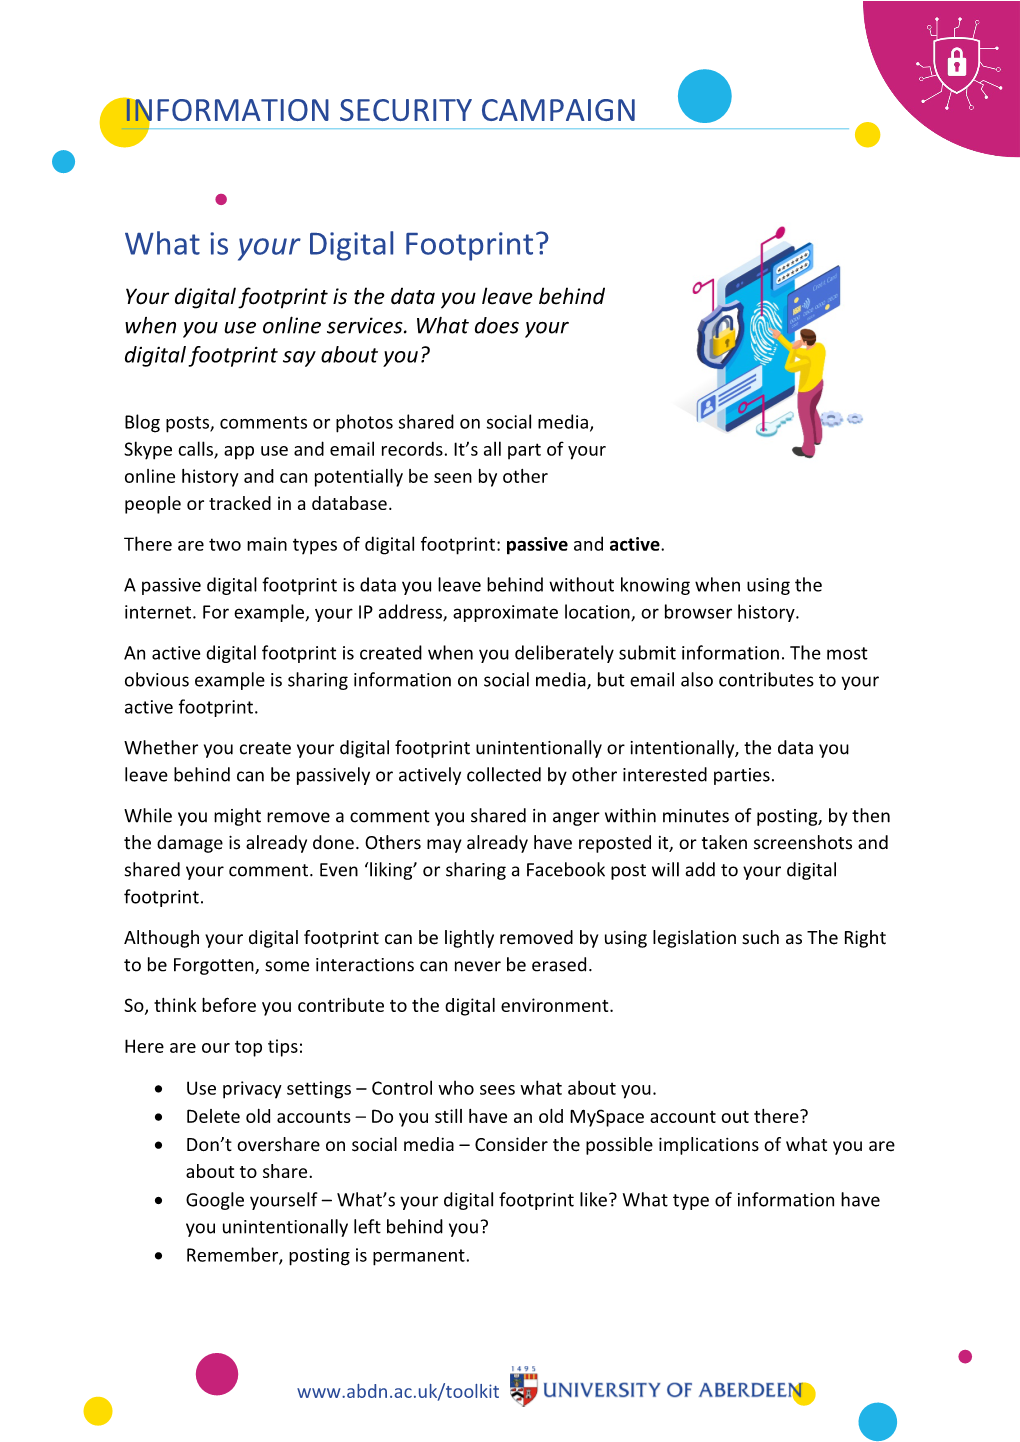 What Is Your Digital Footprint? Your Digital Footprint Is the Data You Leave Behind When You Use Online Services